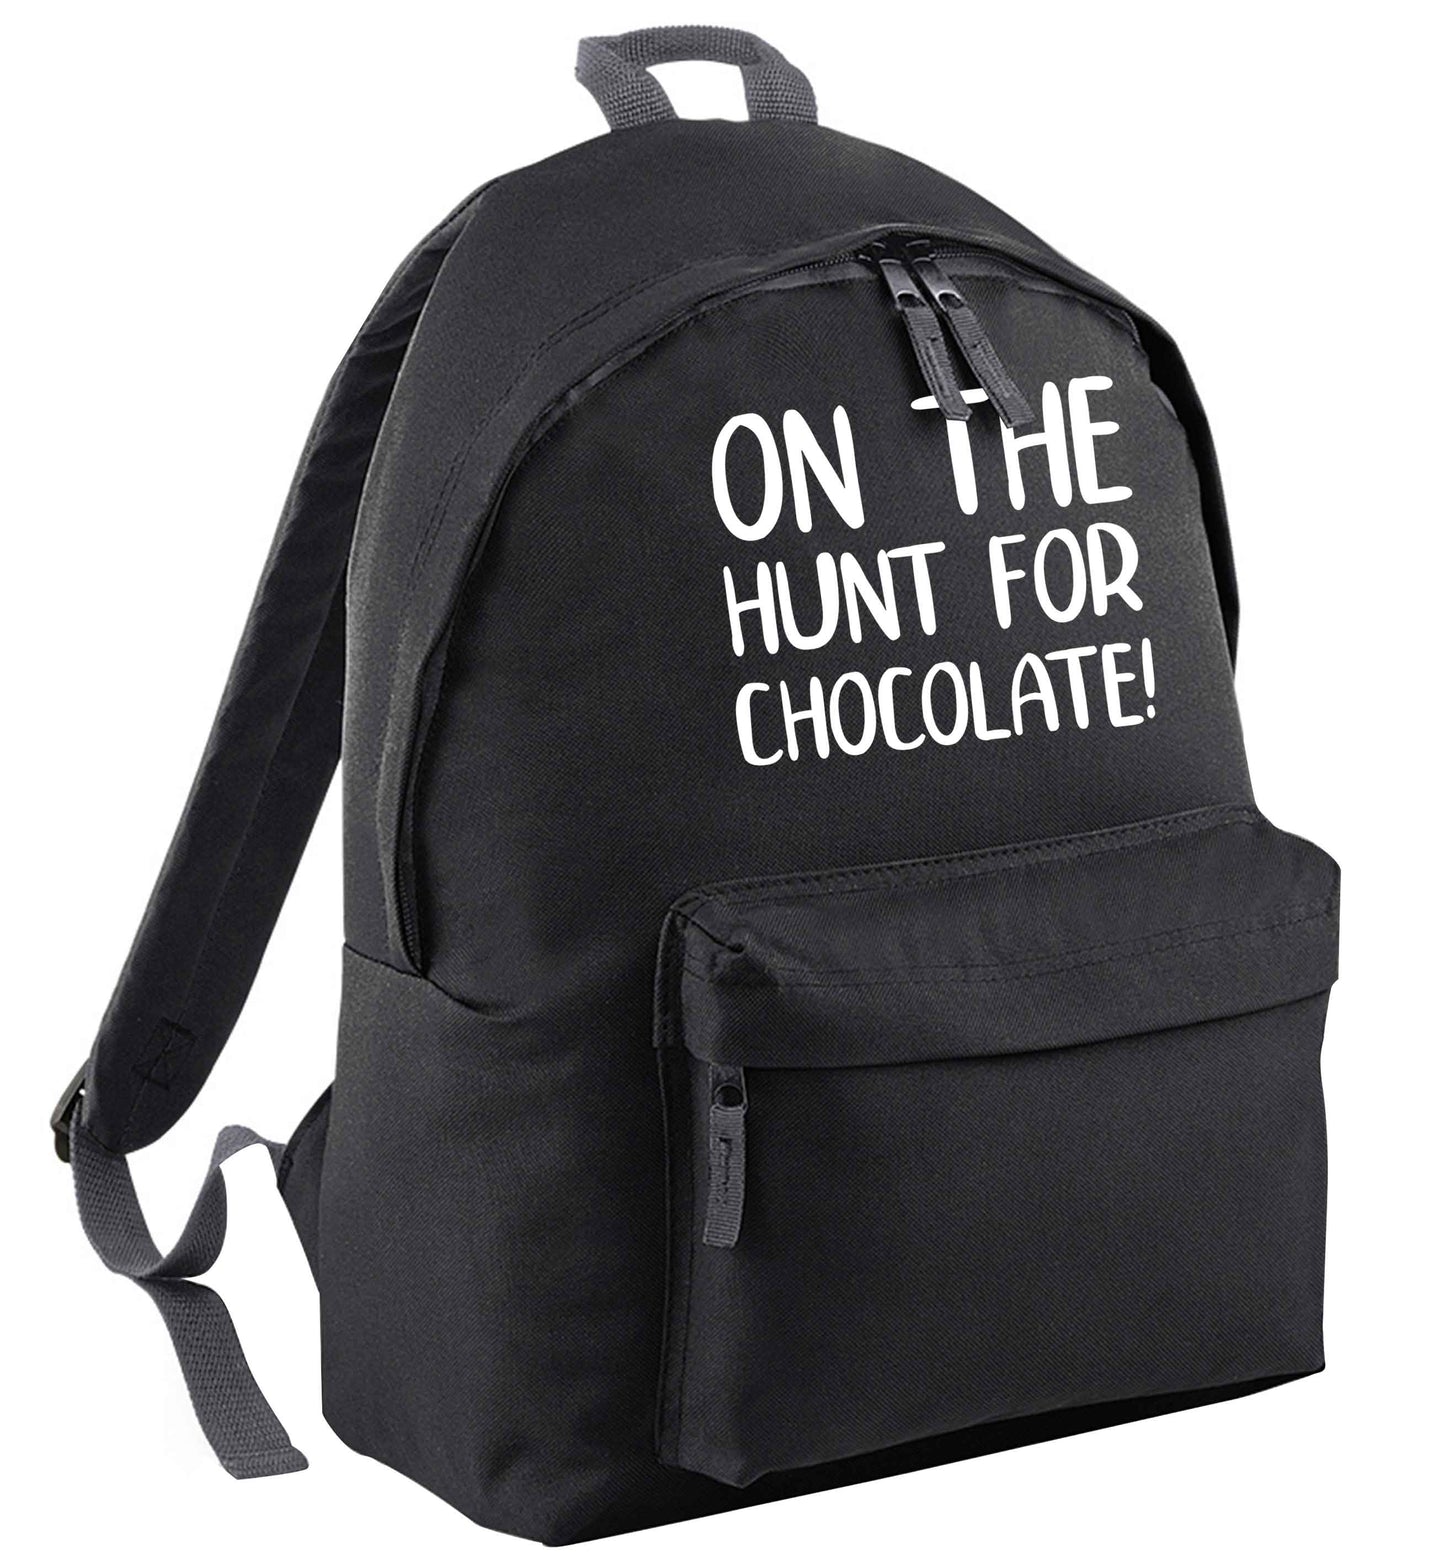 On the hunt for chocolate! black adults backpack